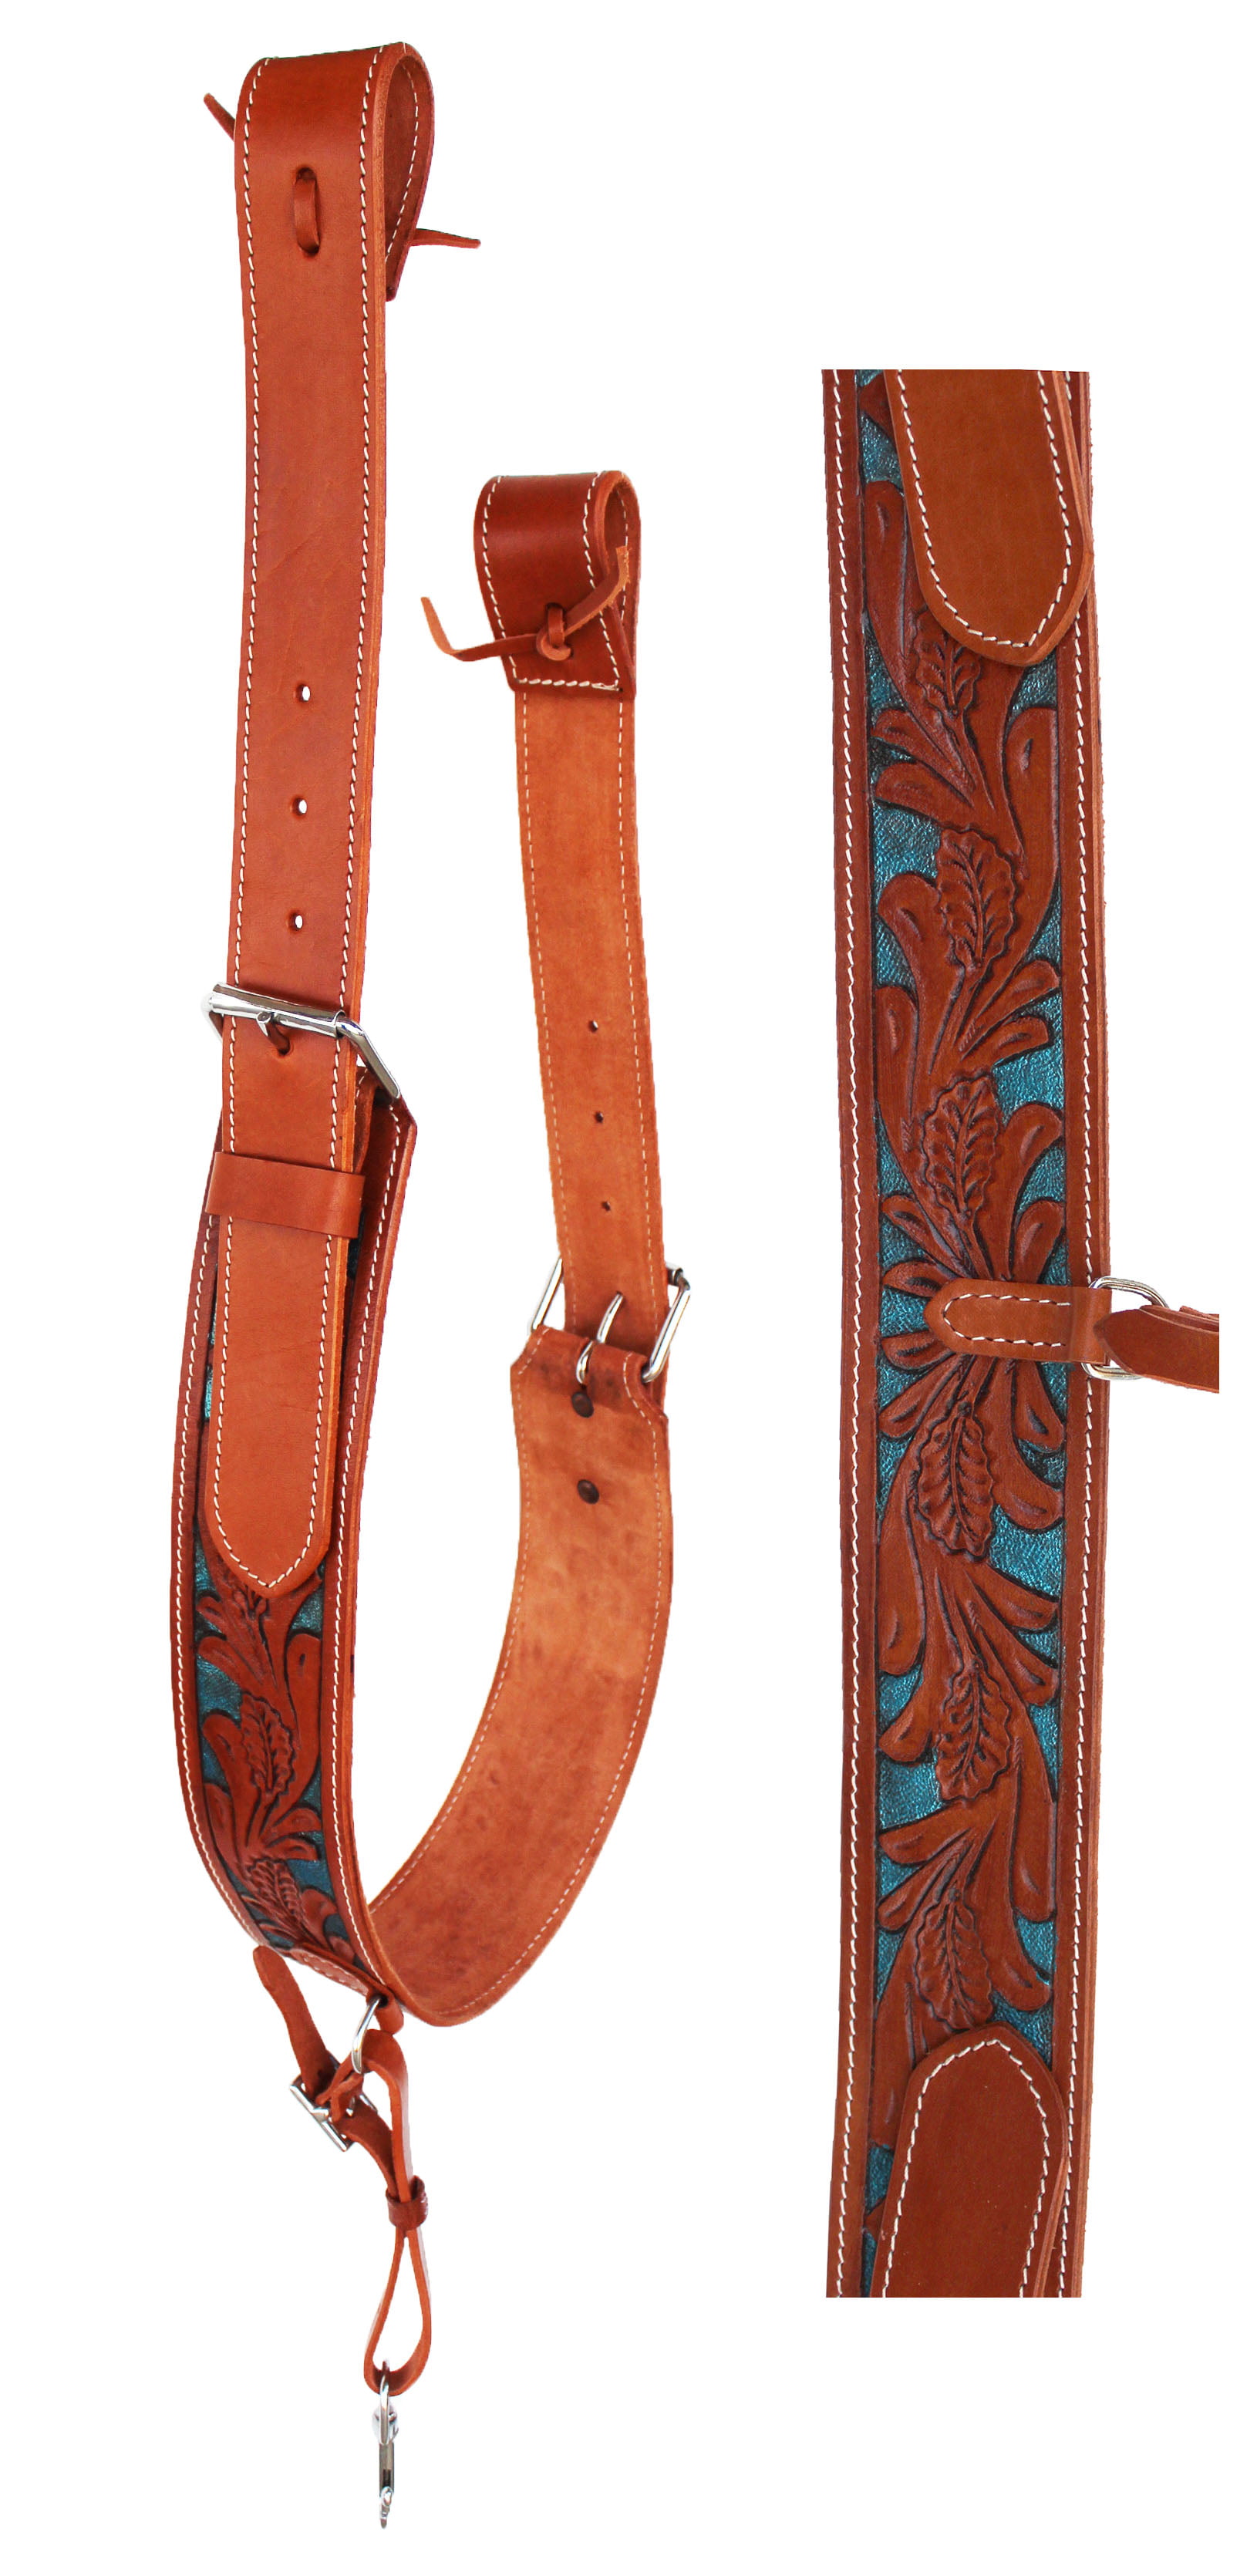 Horse Western Floral Tooled Leather Rear Flank Saddle Cinch w/ Billets 9772TI 